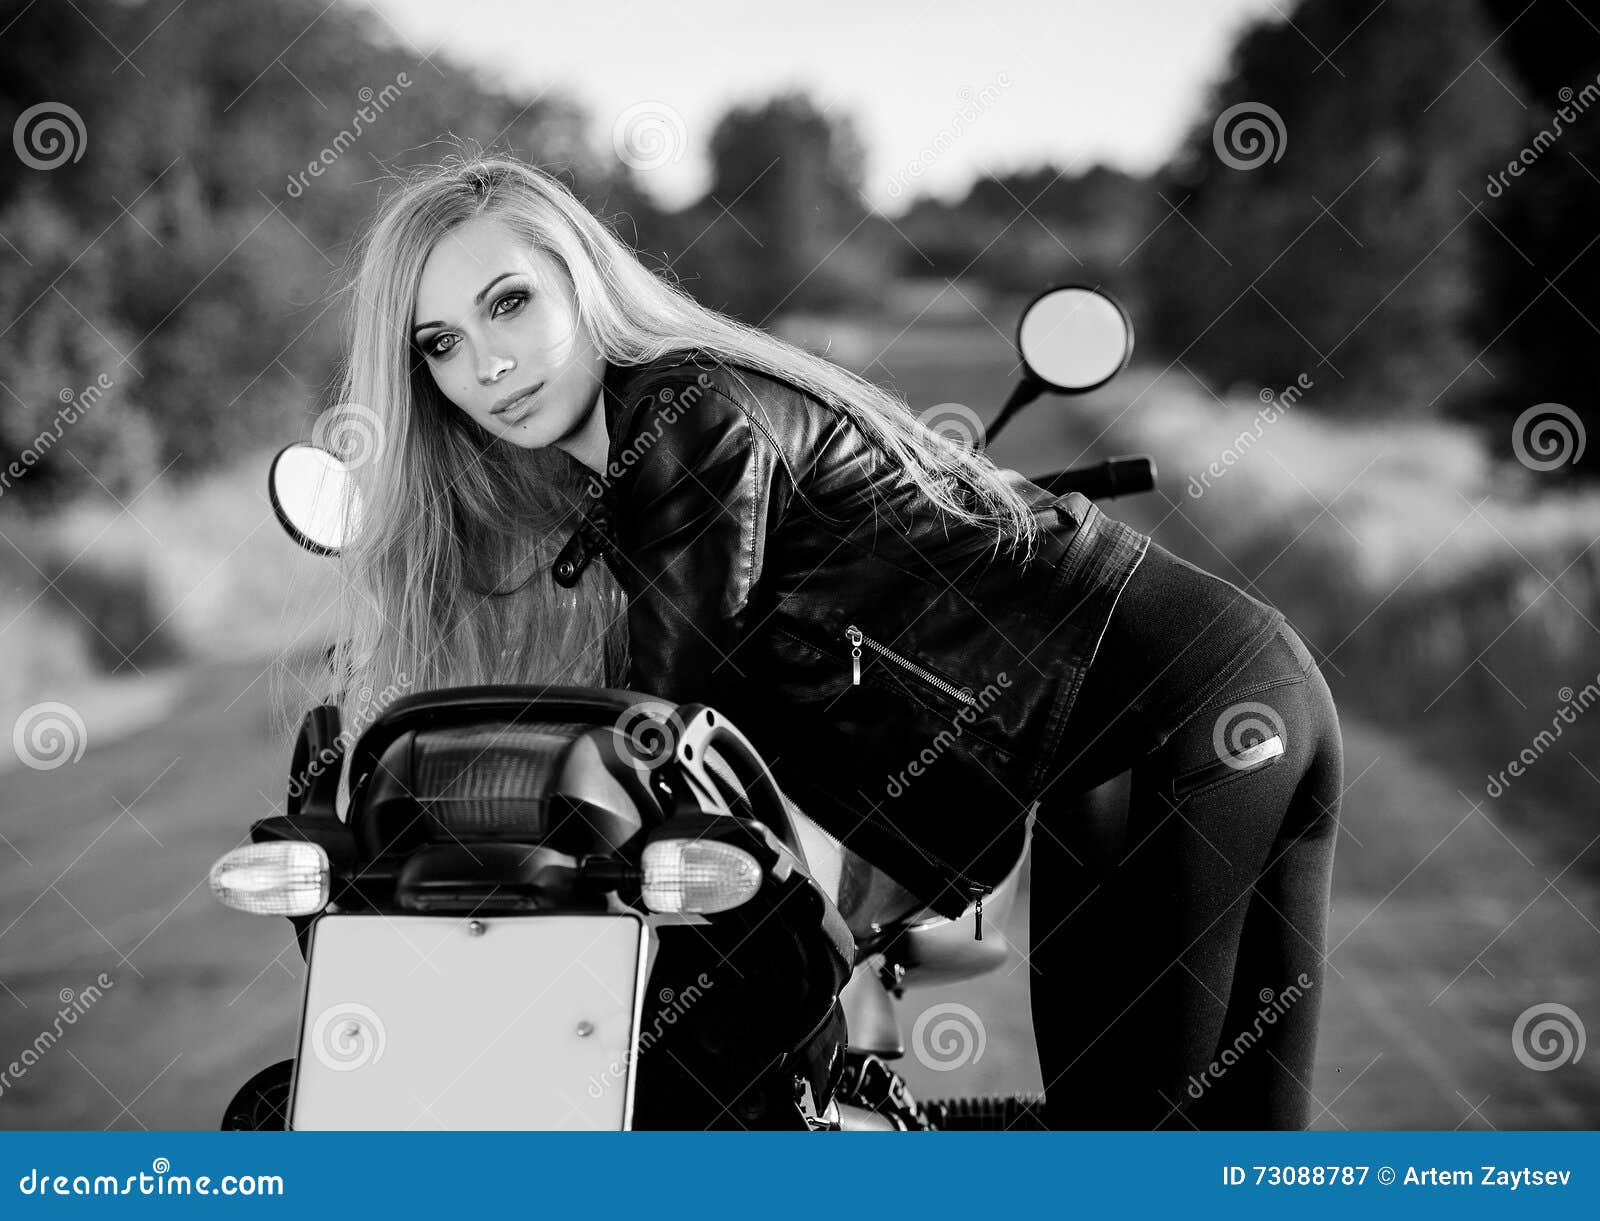 Beautiful Woman on the Motorcycle. Black and White Stock Image - Image ...